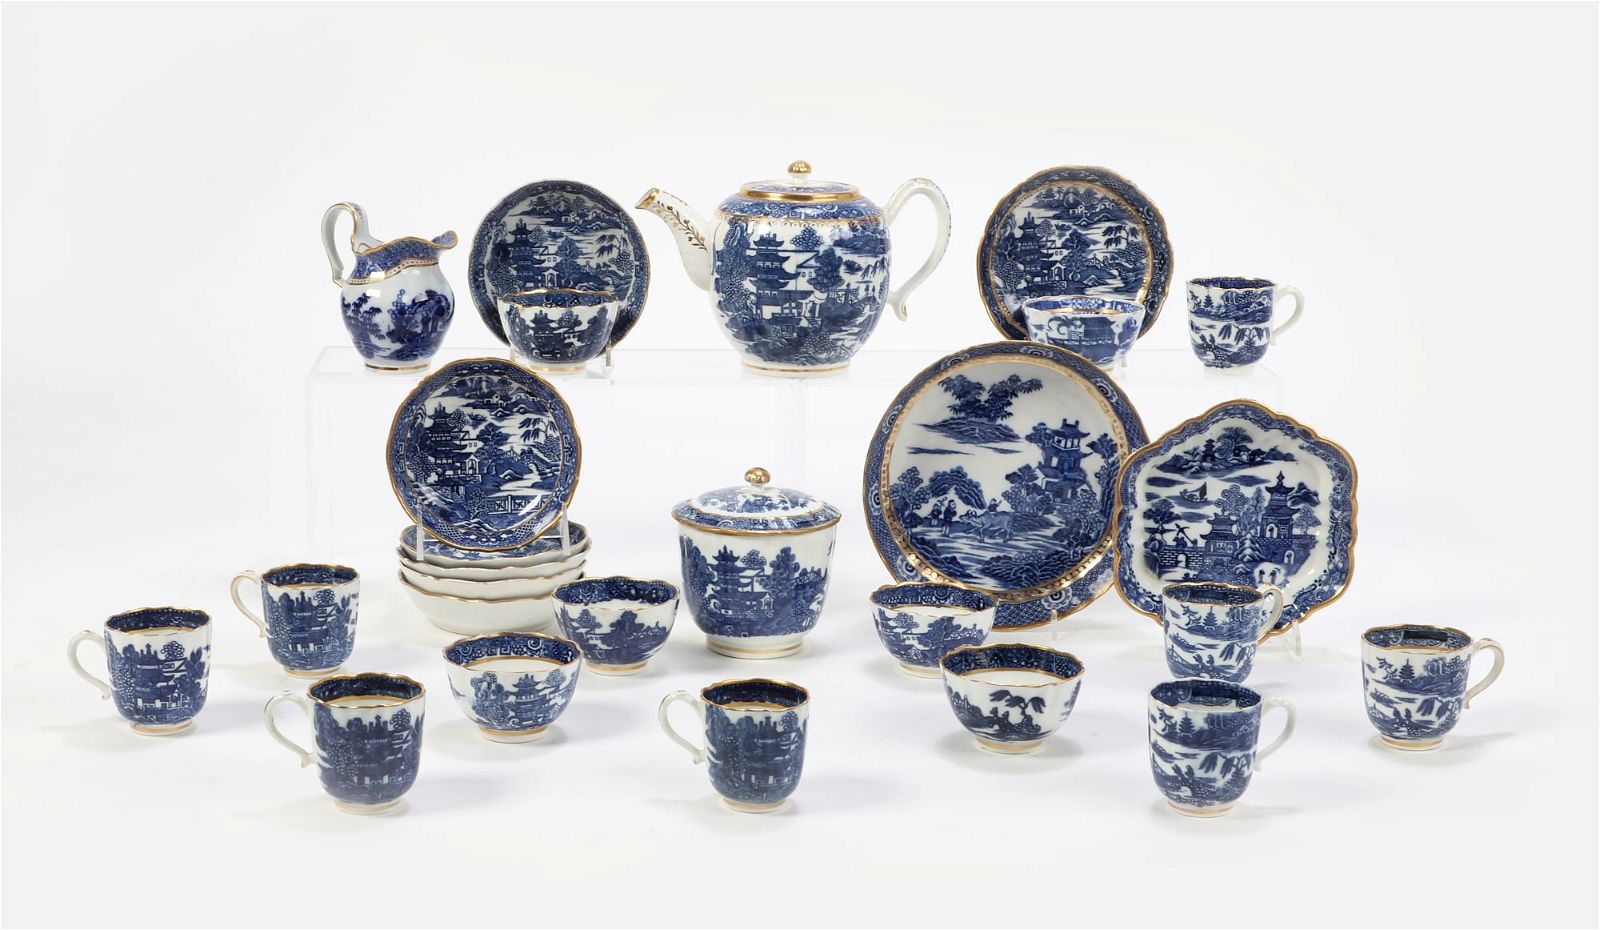 CAUGHLEY BLUE AND WHITE PORCELAIN 2fb2f2f